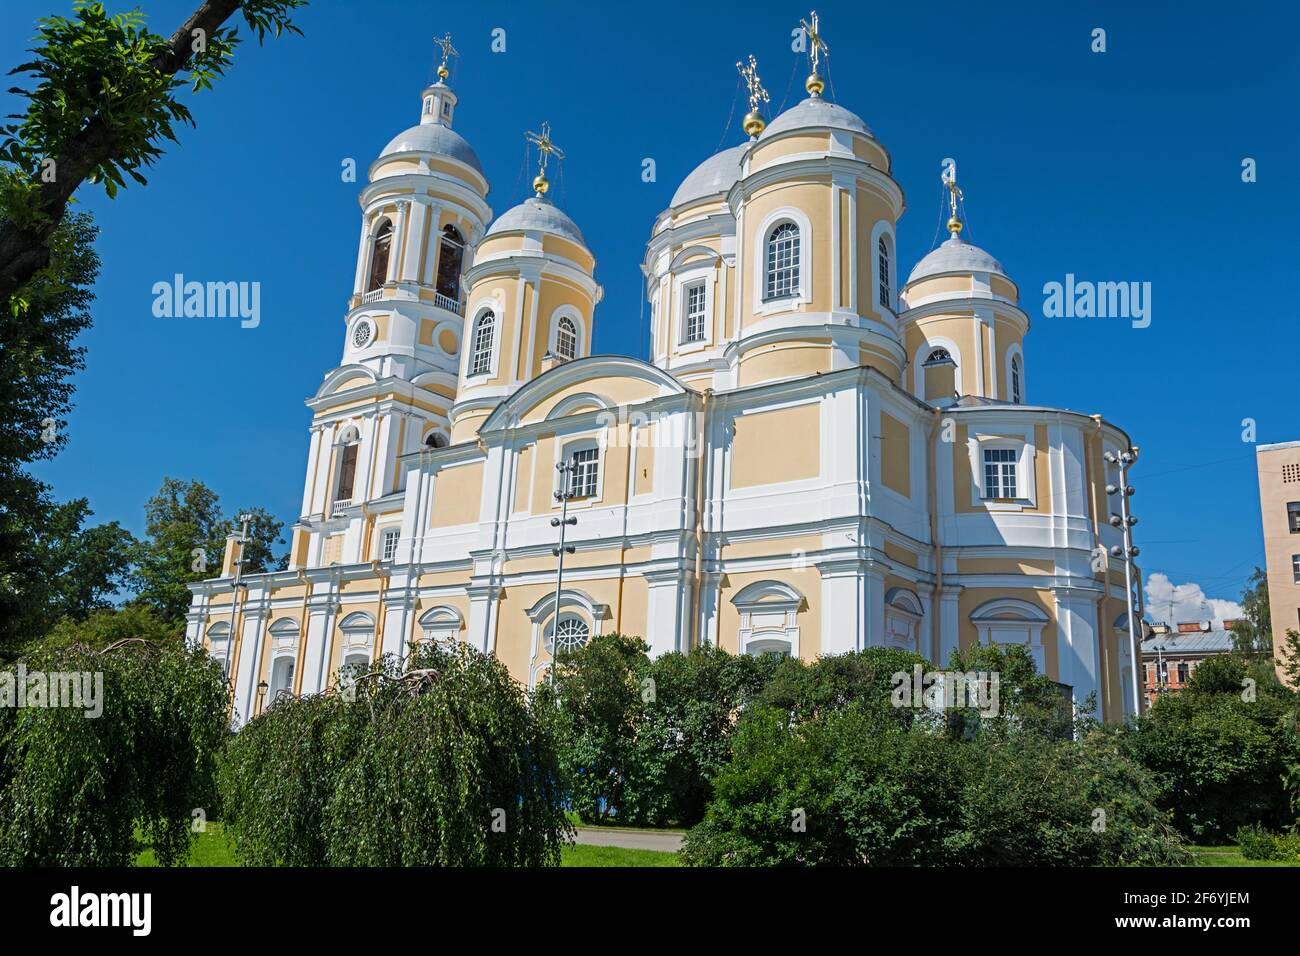 ST. PETERSBURG, RUSSIA - JULY 11, 2016: The Prince St. Vladimir's Cathedral , formally the Cathedral of St. Equal to the Apostles Prince Vladimir in S Stock Photo